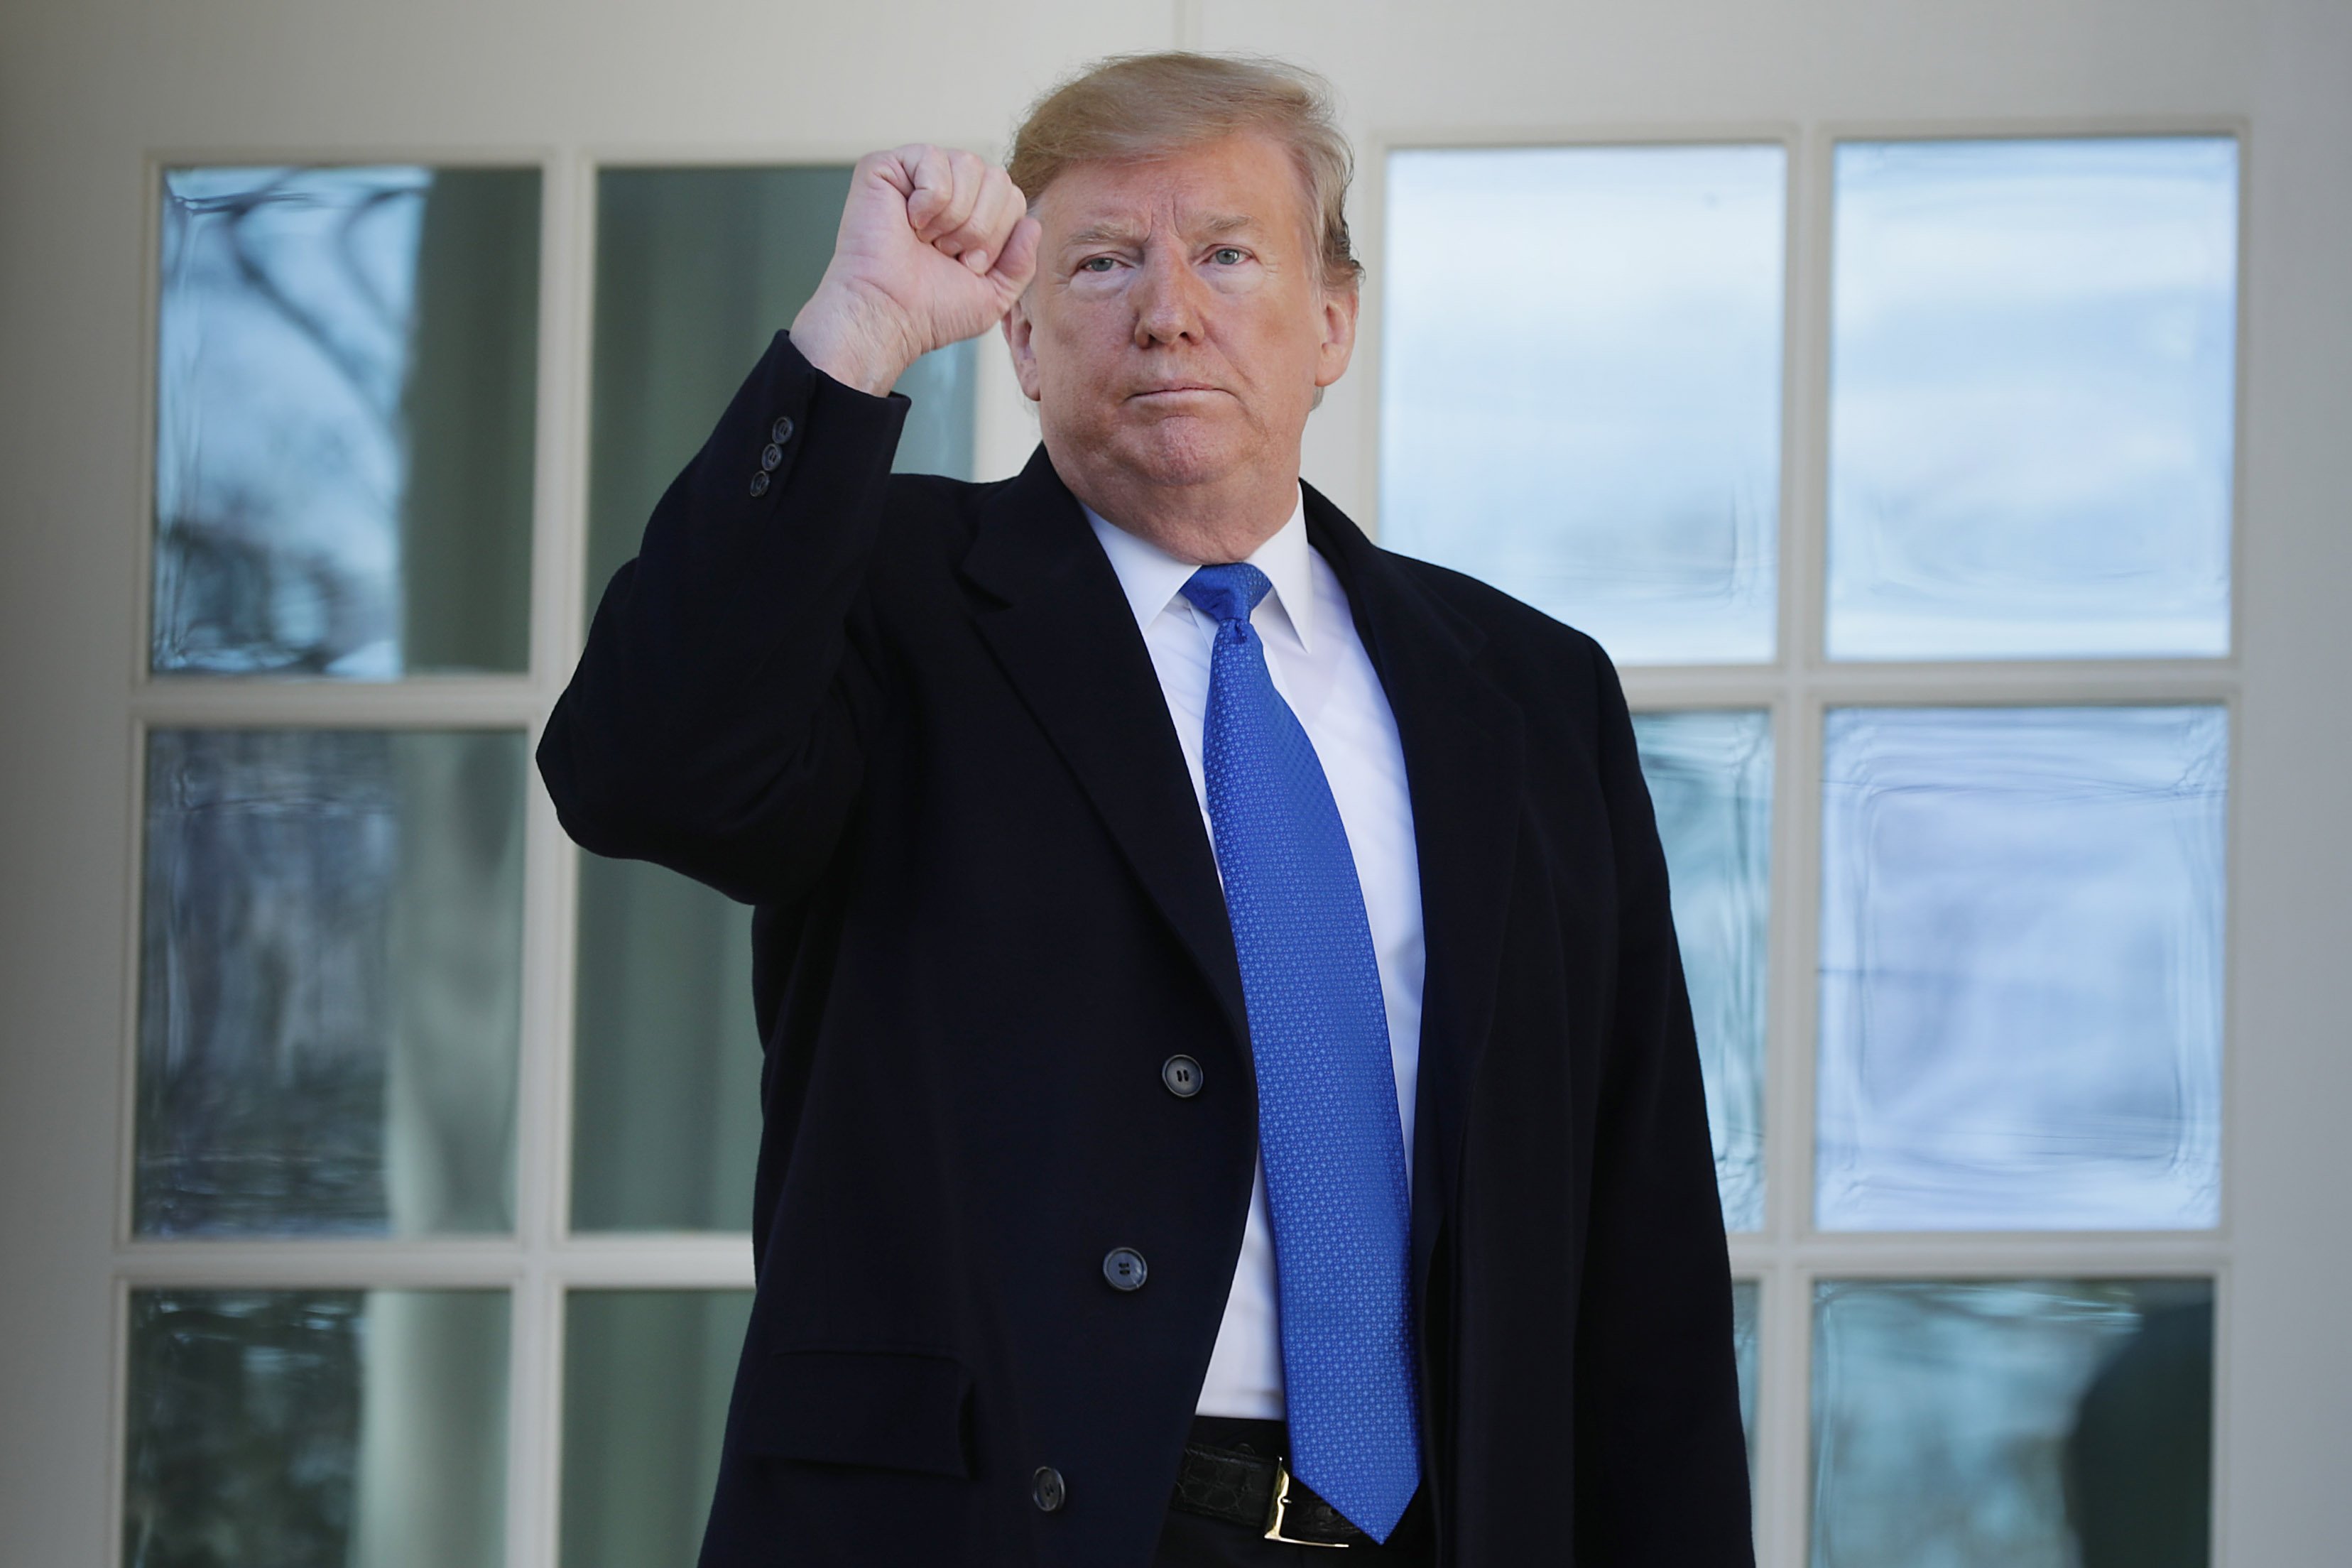 President Donald Trump after declaring the national emergency at the Rose Garden | Photo: Getty Images